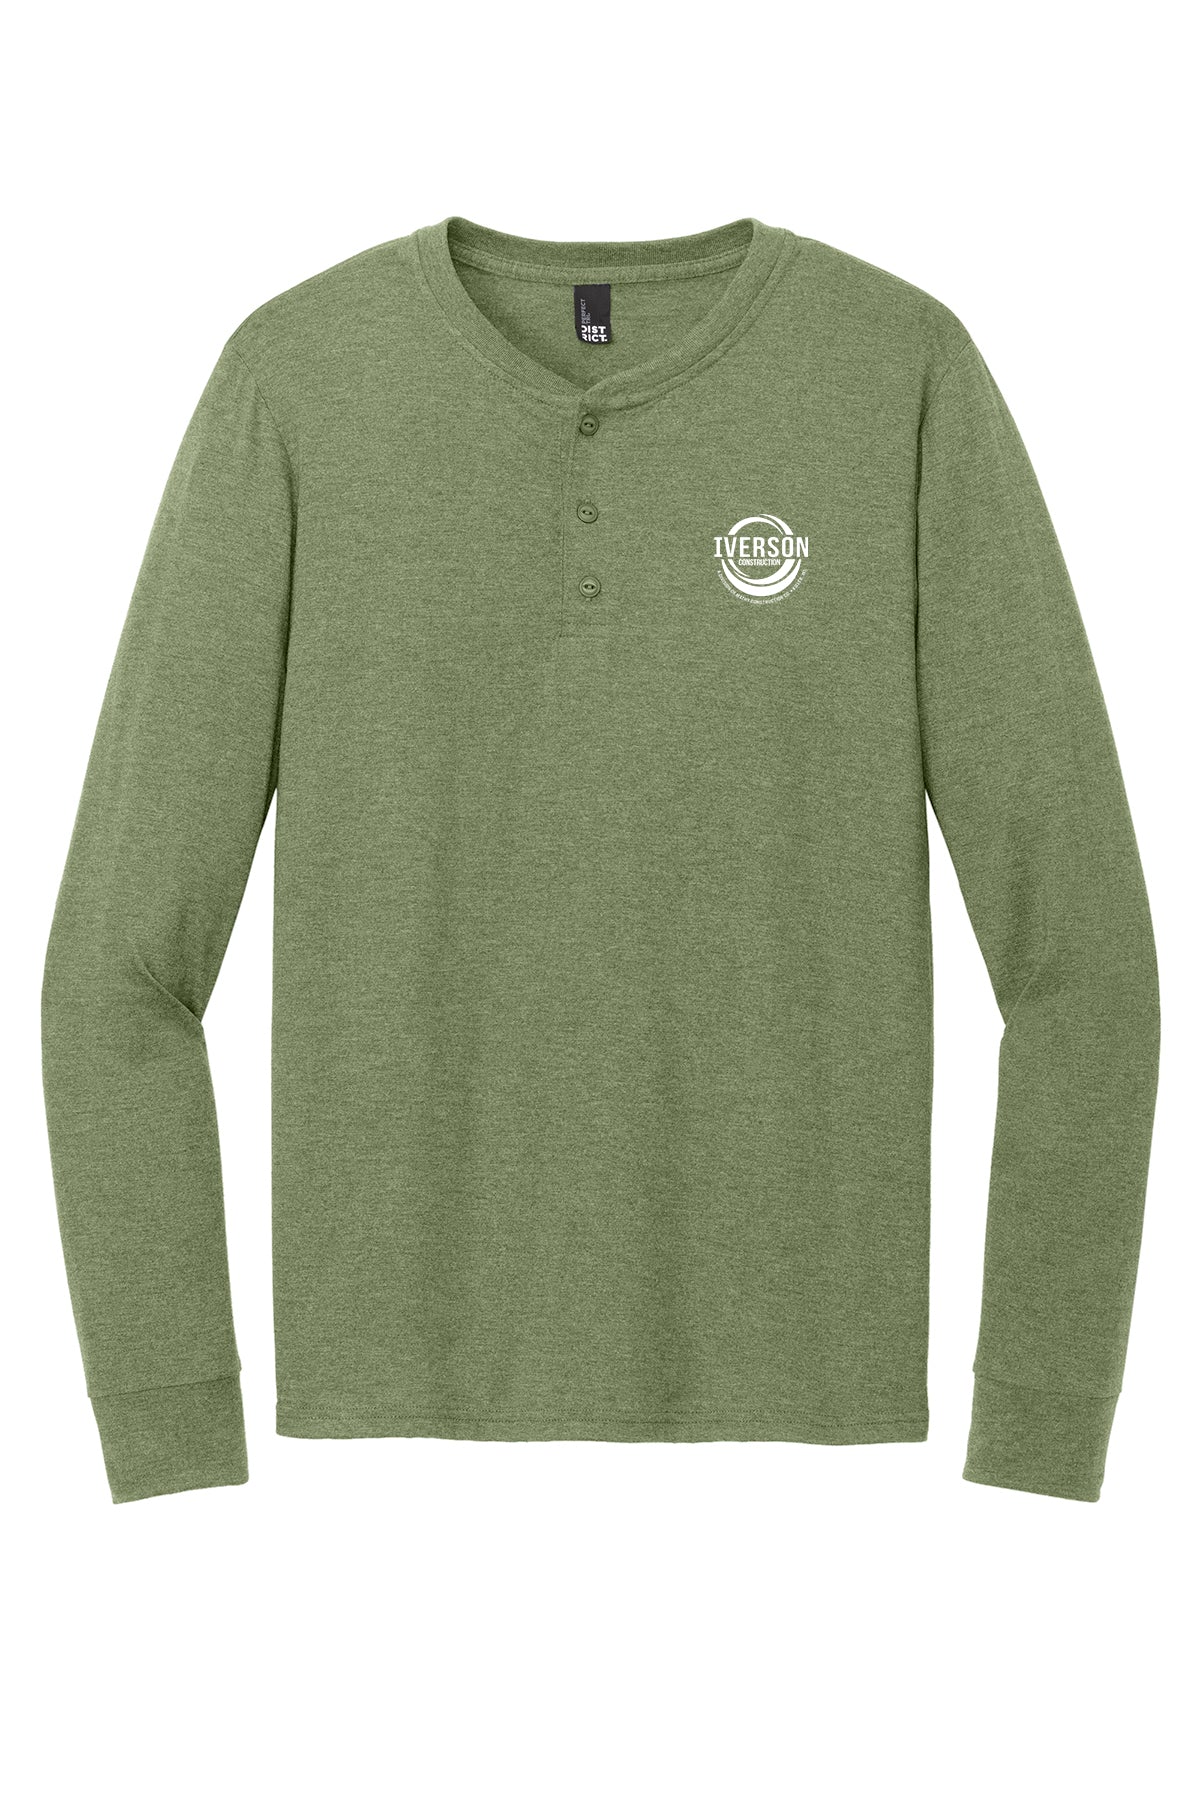 Iverson Construction Henley